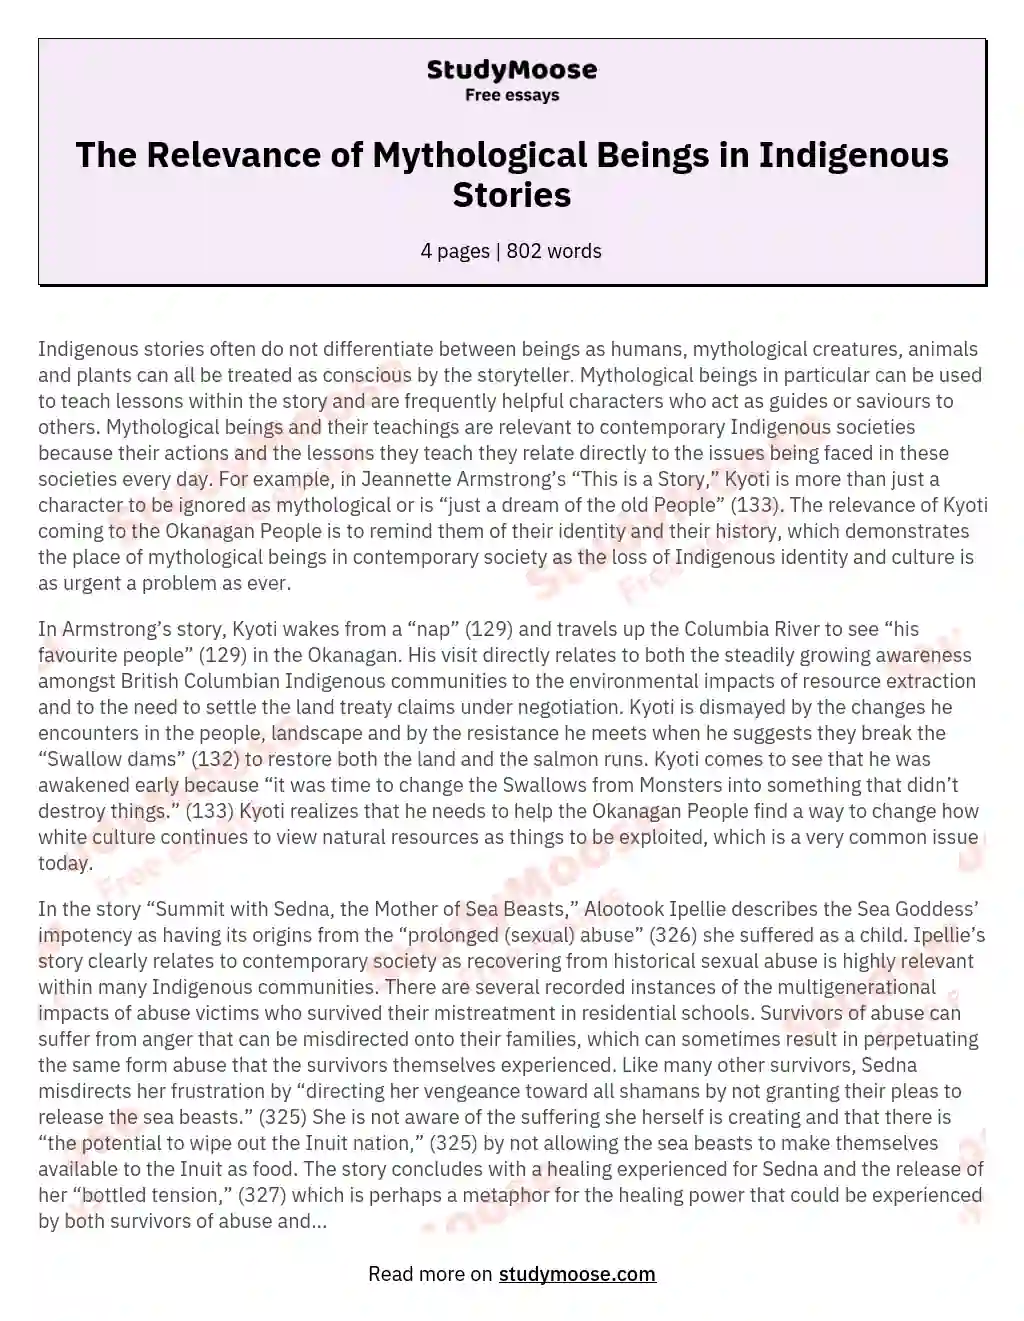 The Relevance of Mythological Beings in Indigenous Stories essay